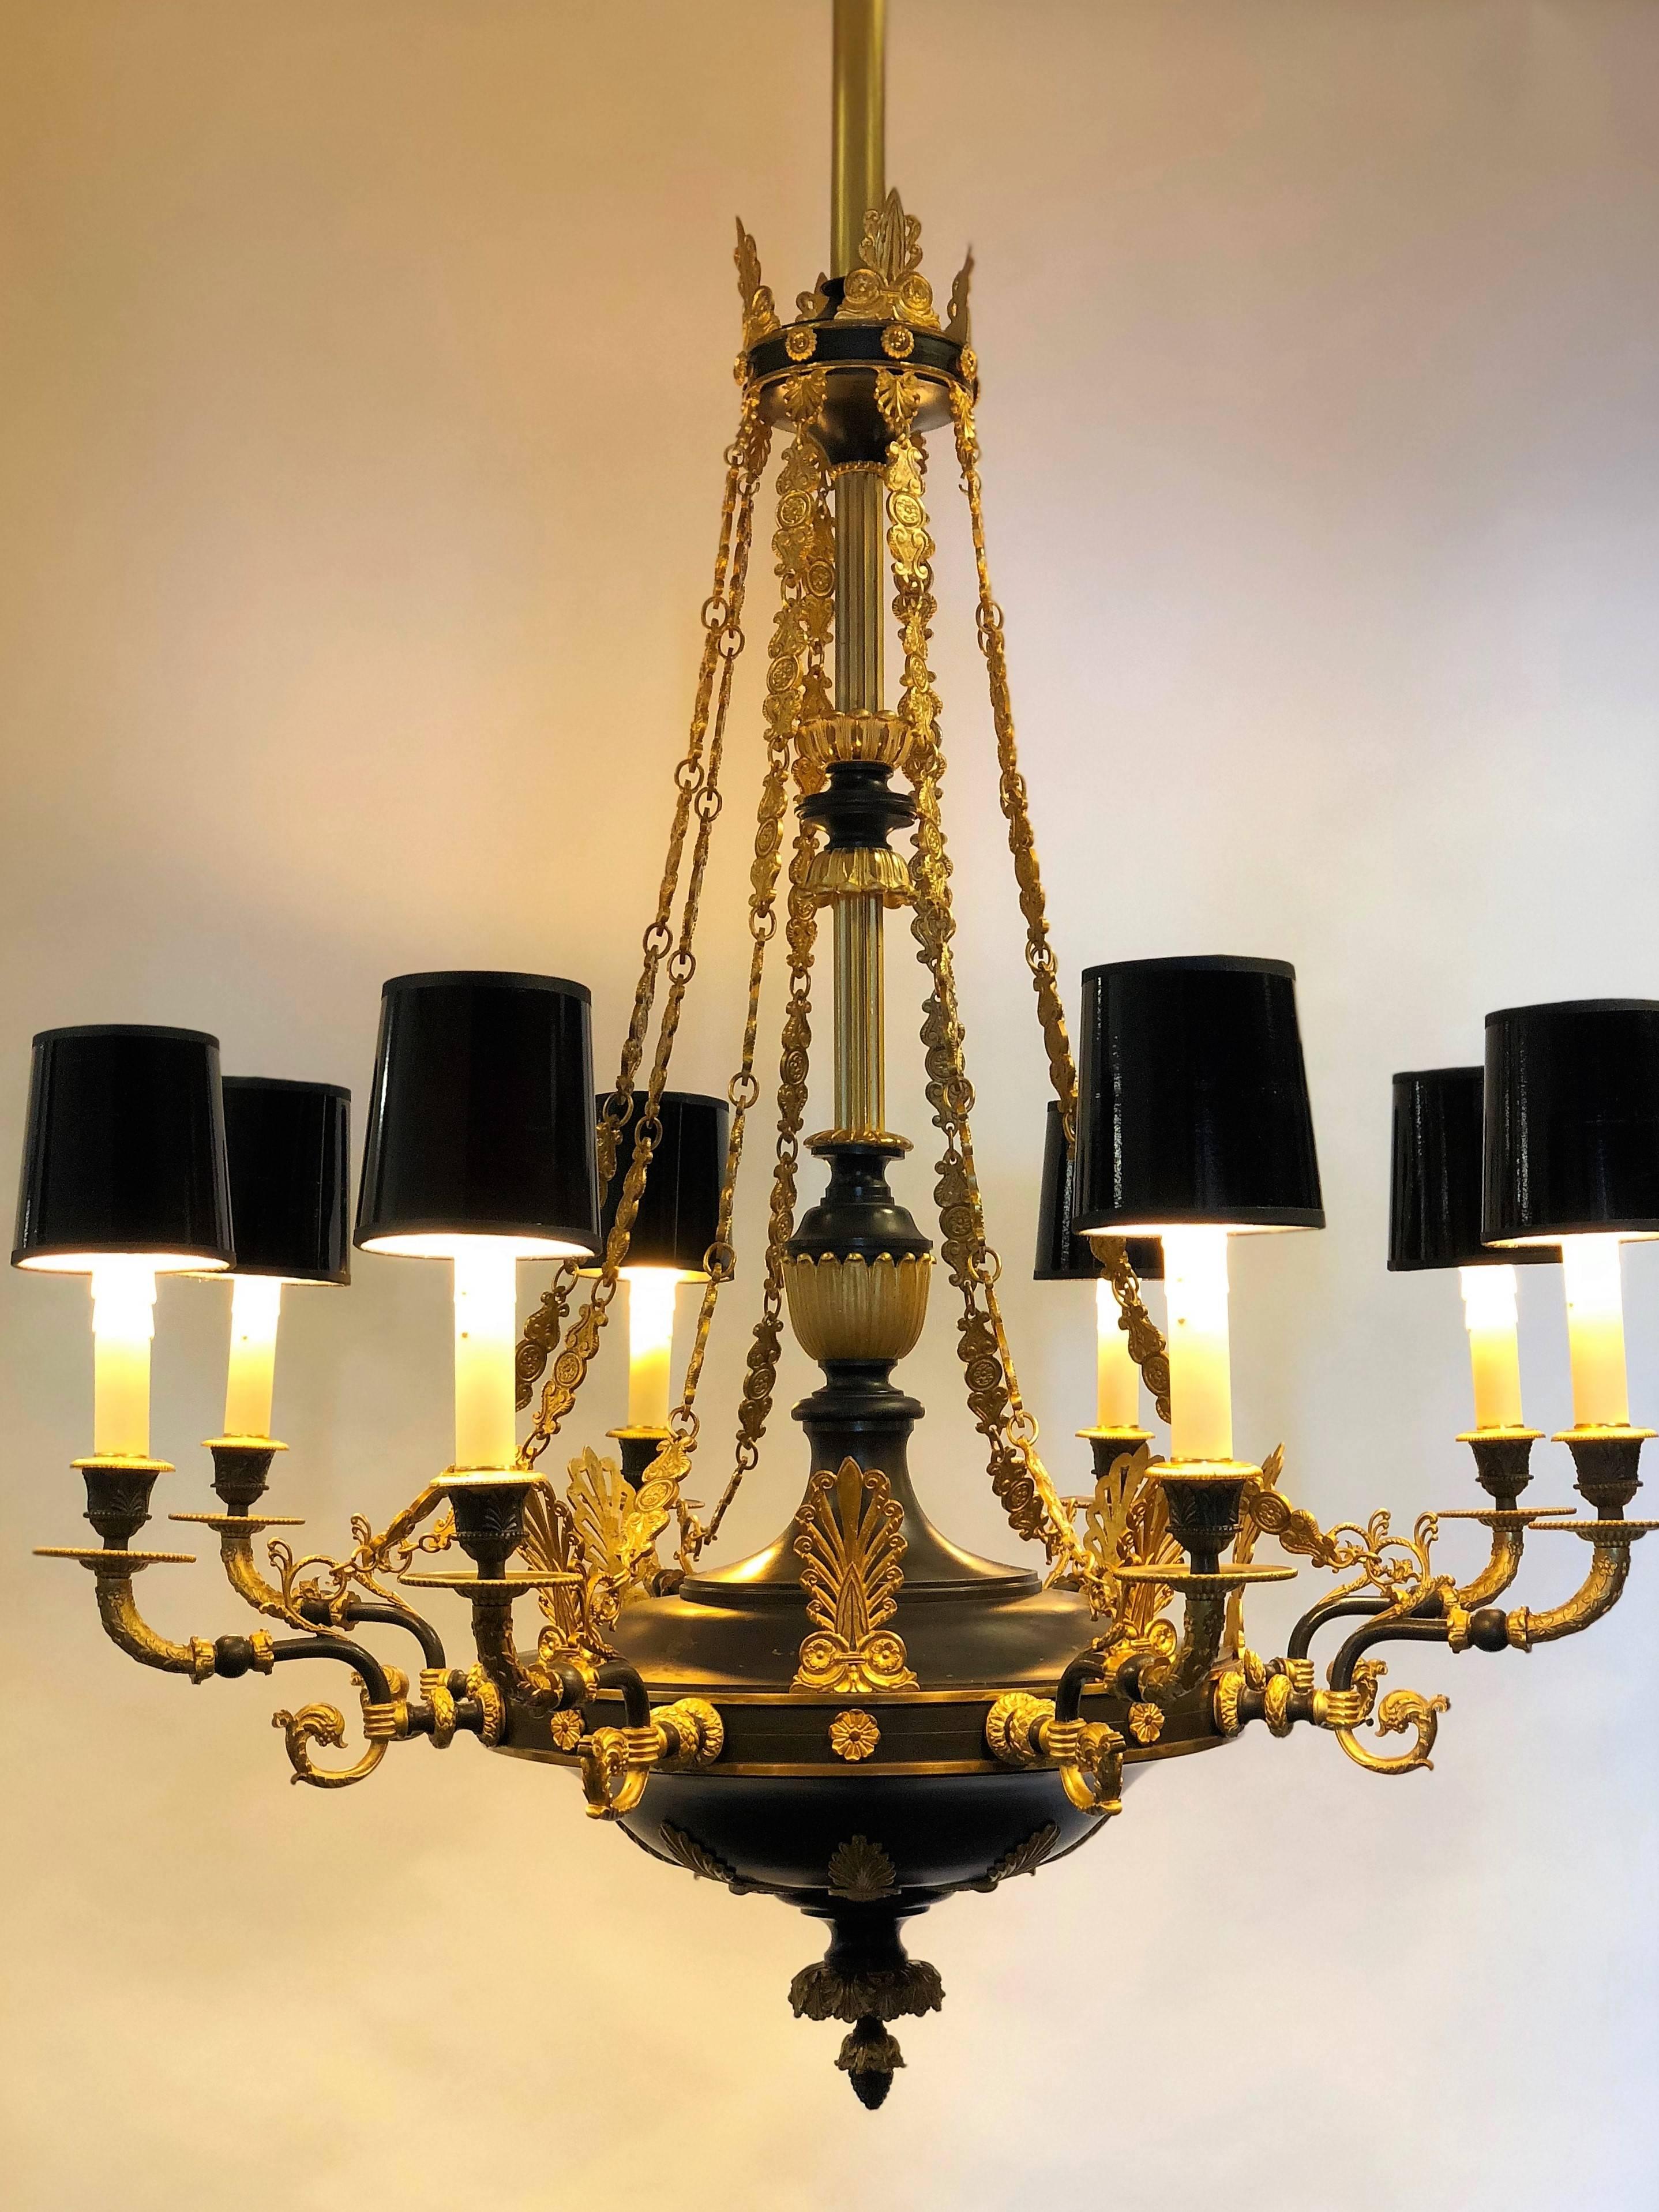 This 20th century Empire neoclassical French gild and patinated eight lights chandelier is recently restored.
Wires has been changed.